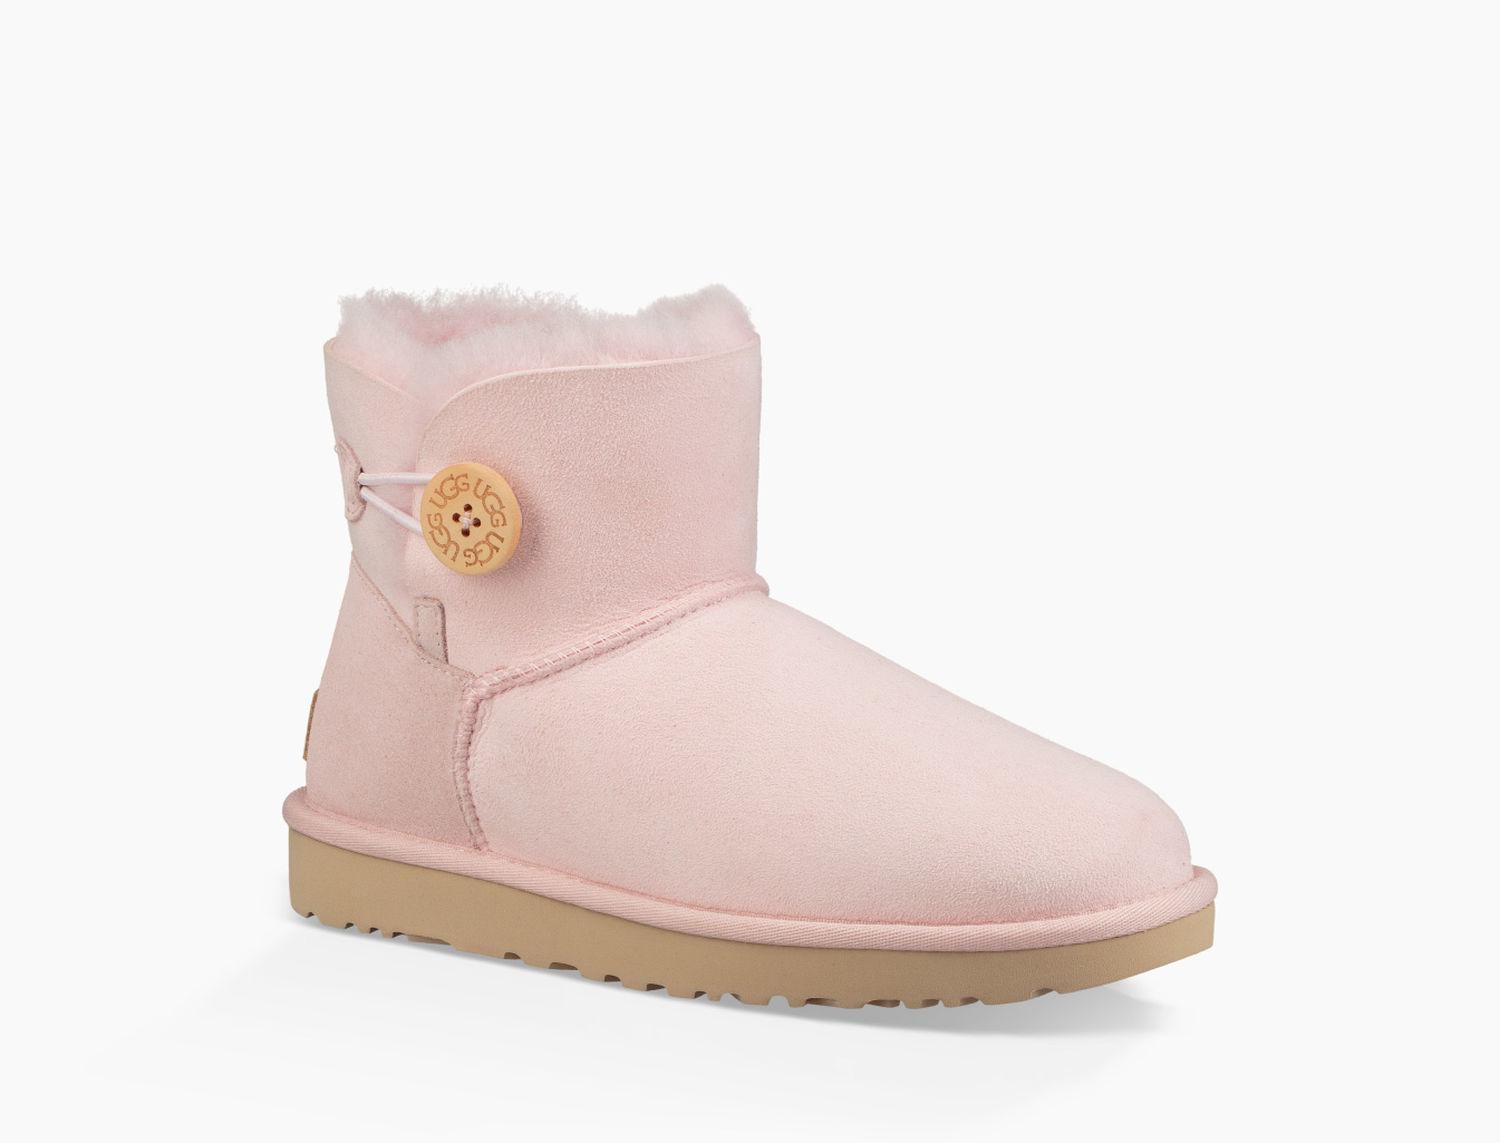 UGG Suede Women's Mini Bailey Button Ii Boot in Seashell Pink (Pink) - Lyst